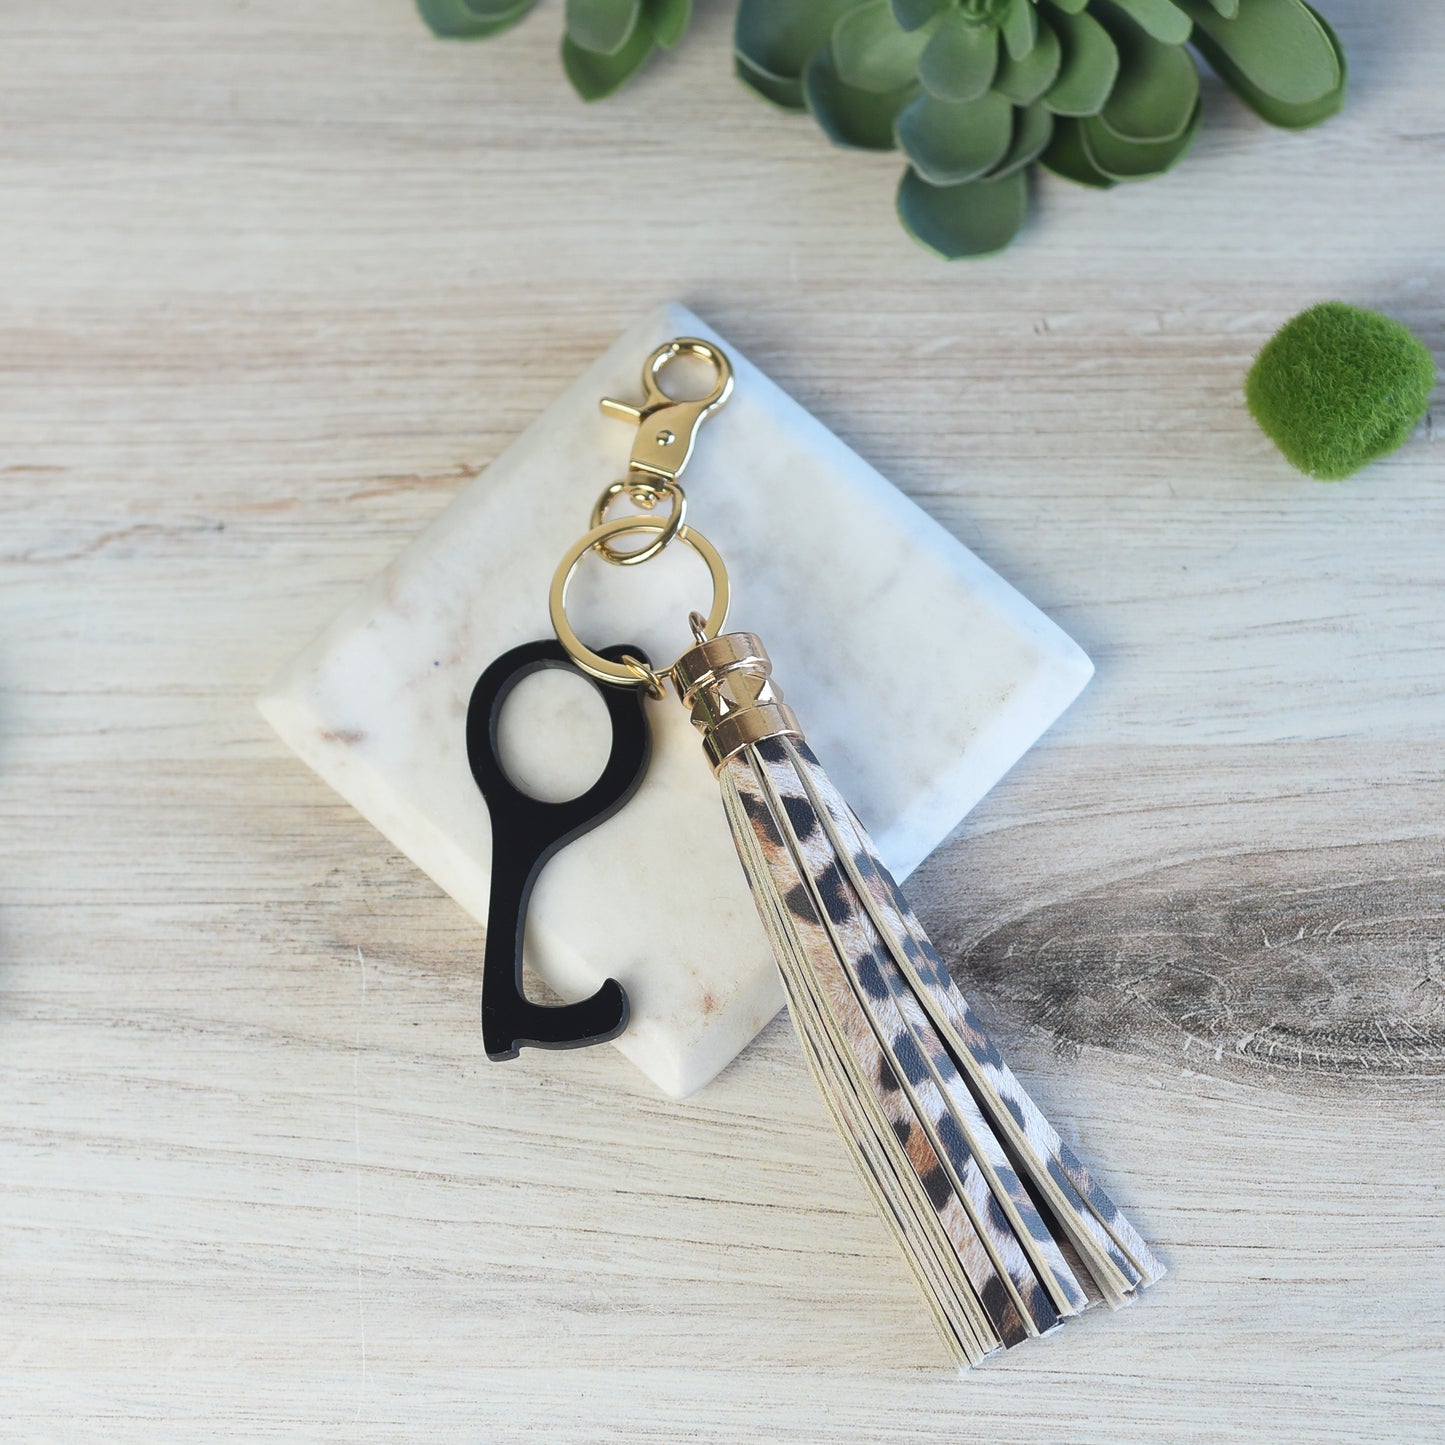 Tassel Keychain with Hands Free Device